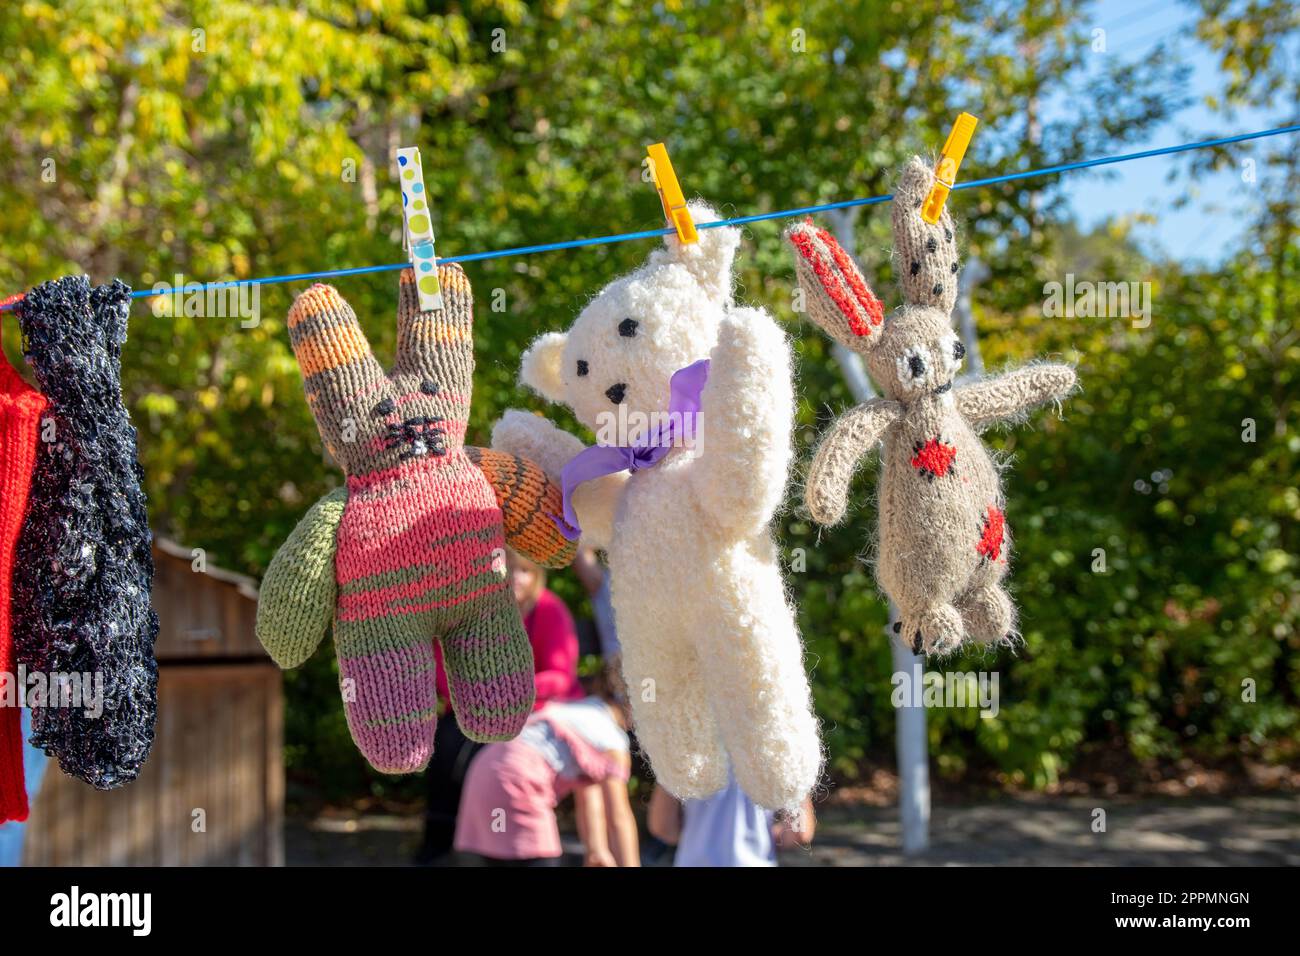 Childrens soft toys. Handmade white teddy bear and plush bunnies on clothesline over blurred natural background. Fixed with clothespins. Stock Photo